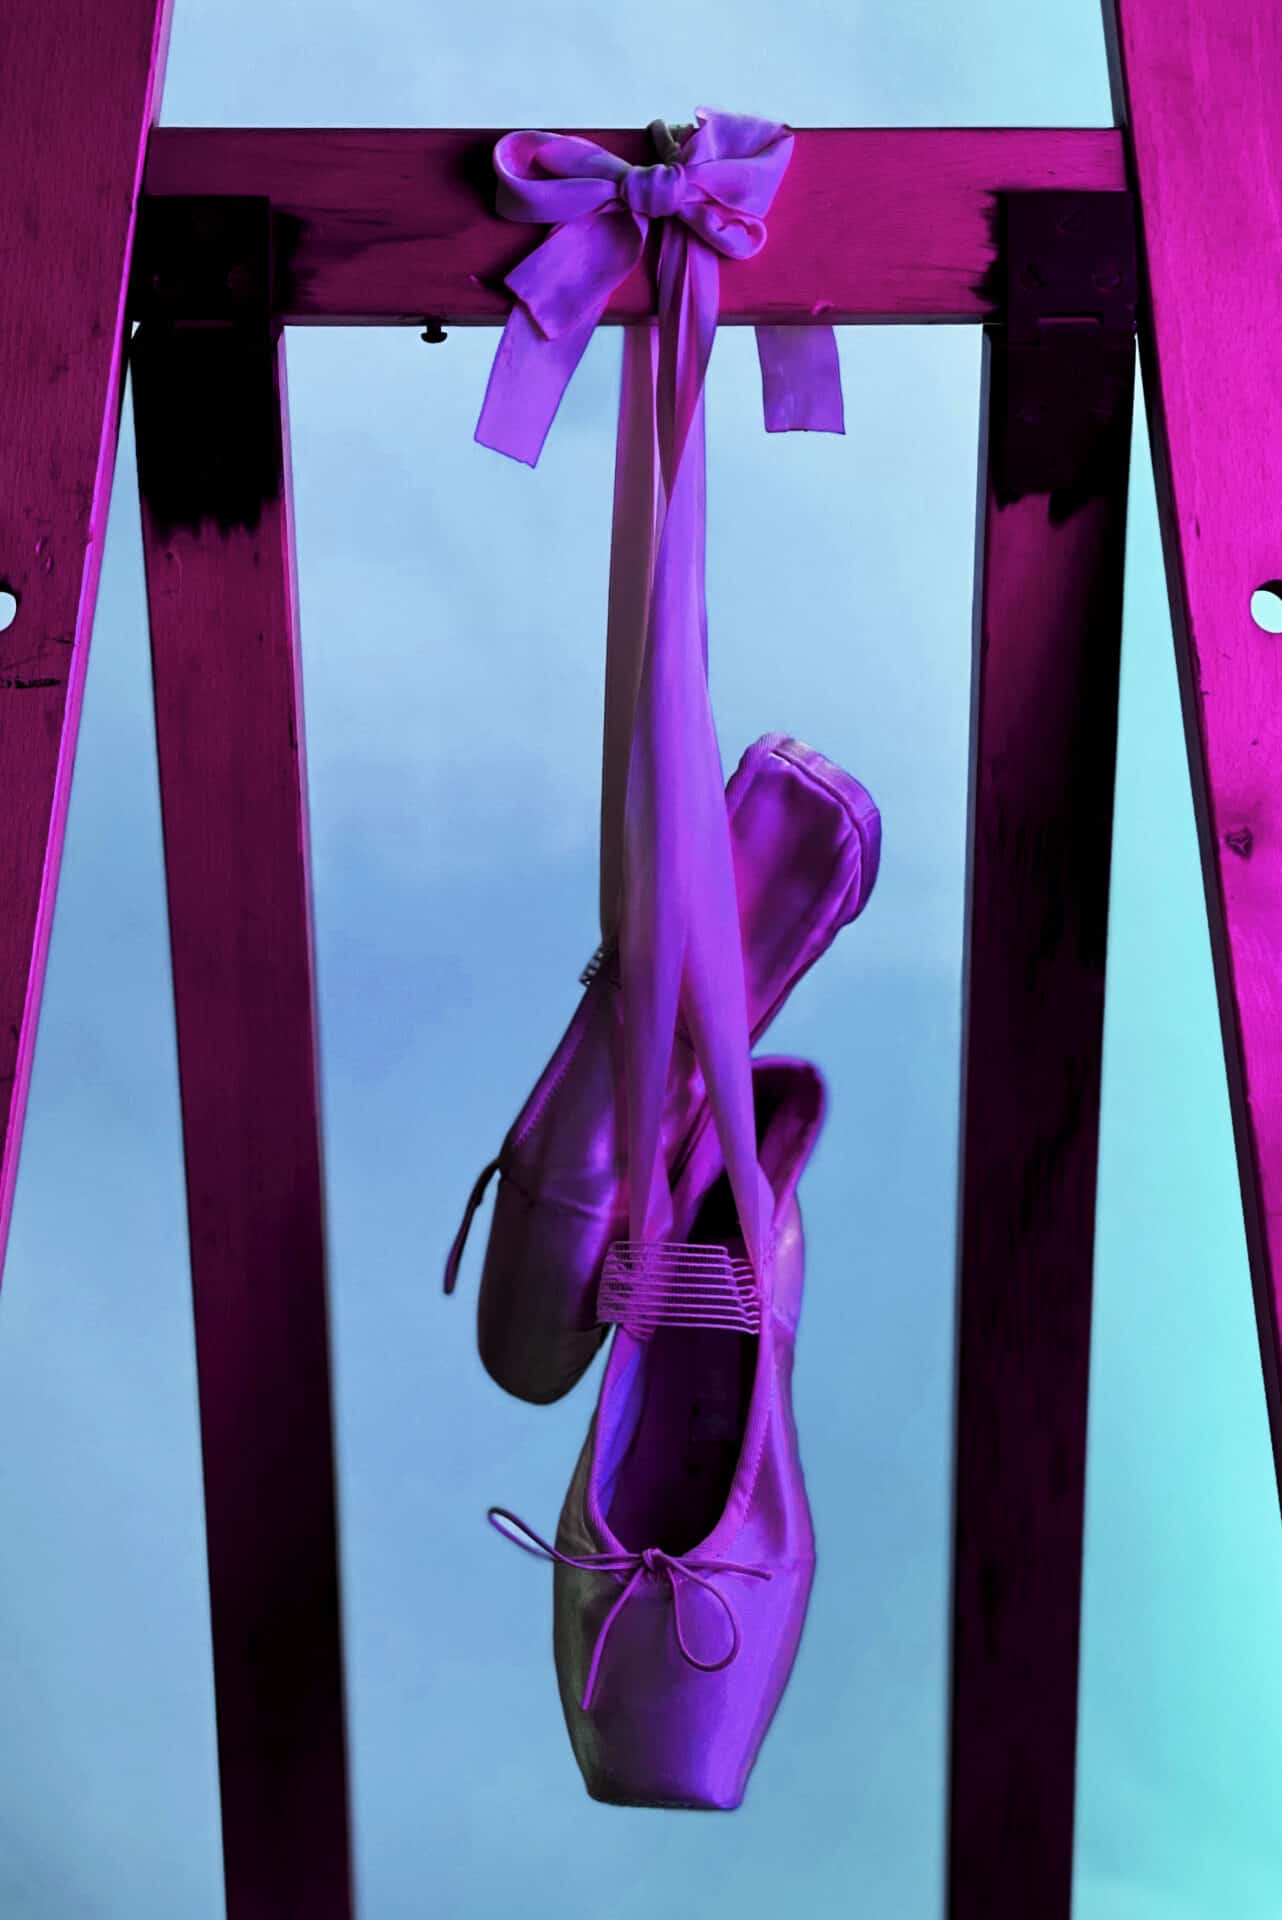 A close-up of ballet shoes hanging from a bar in a dance studio. The image is full of blue, purple, and pink tones that appear to come from a light source within the room.